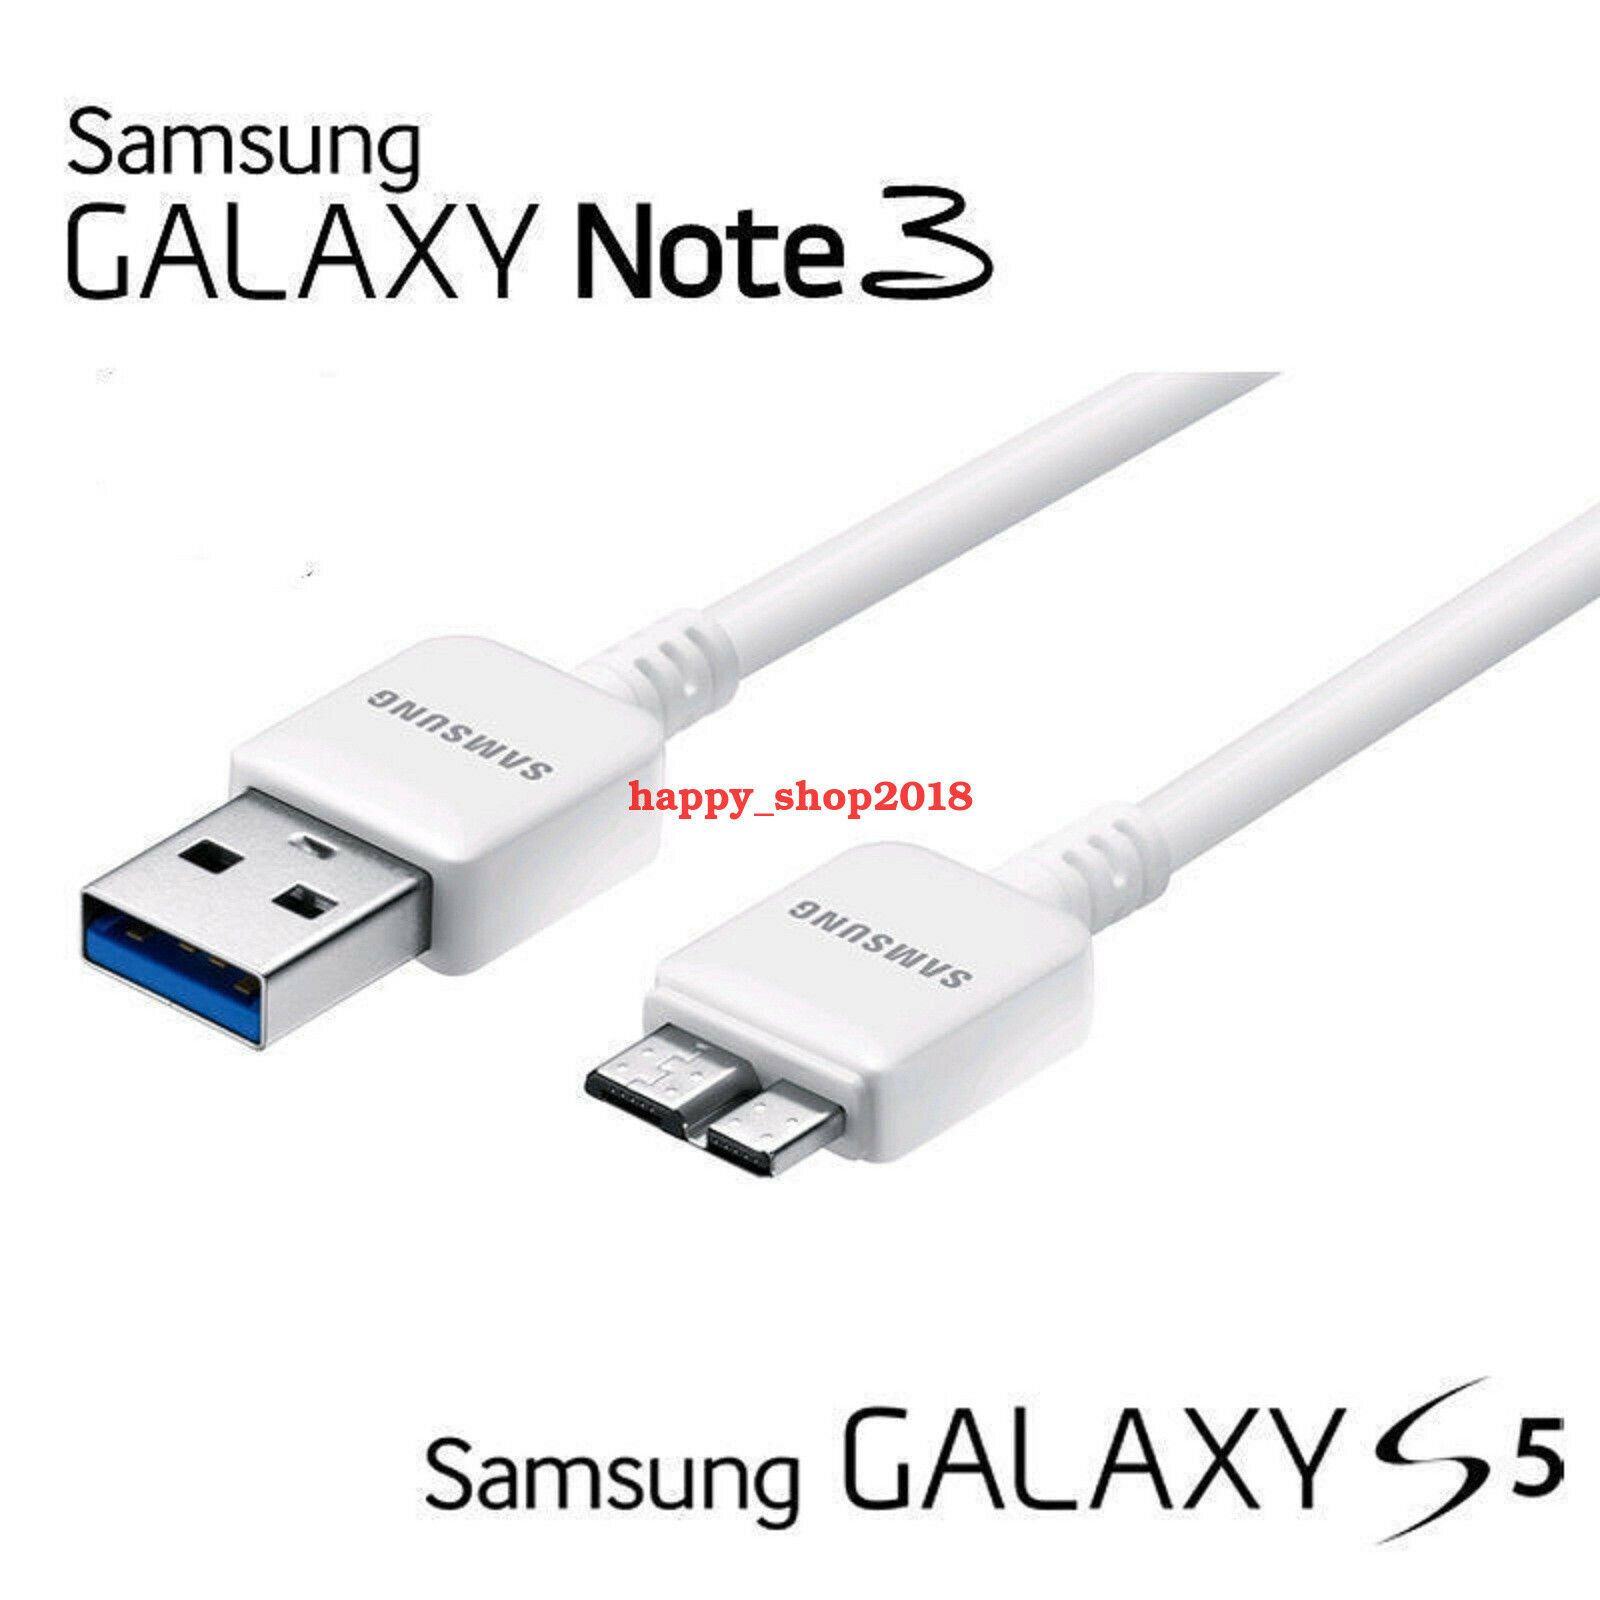 OEM original USB 3.0 Data Charger Cord SYNC Cable for Samsung Galaxy S5 Note 3 New USB 3.0 Data Sync Charger - Click Image to Close